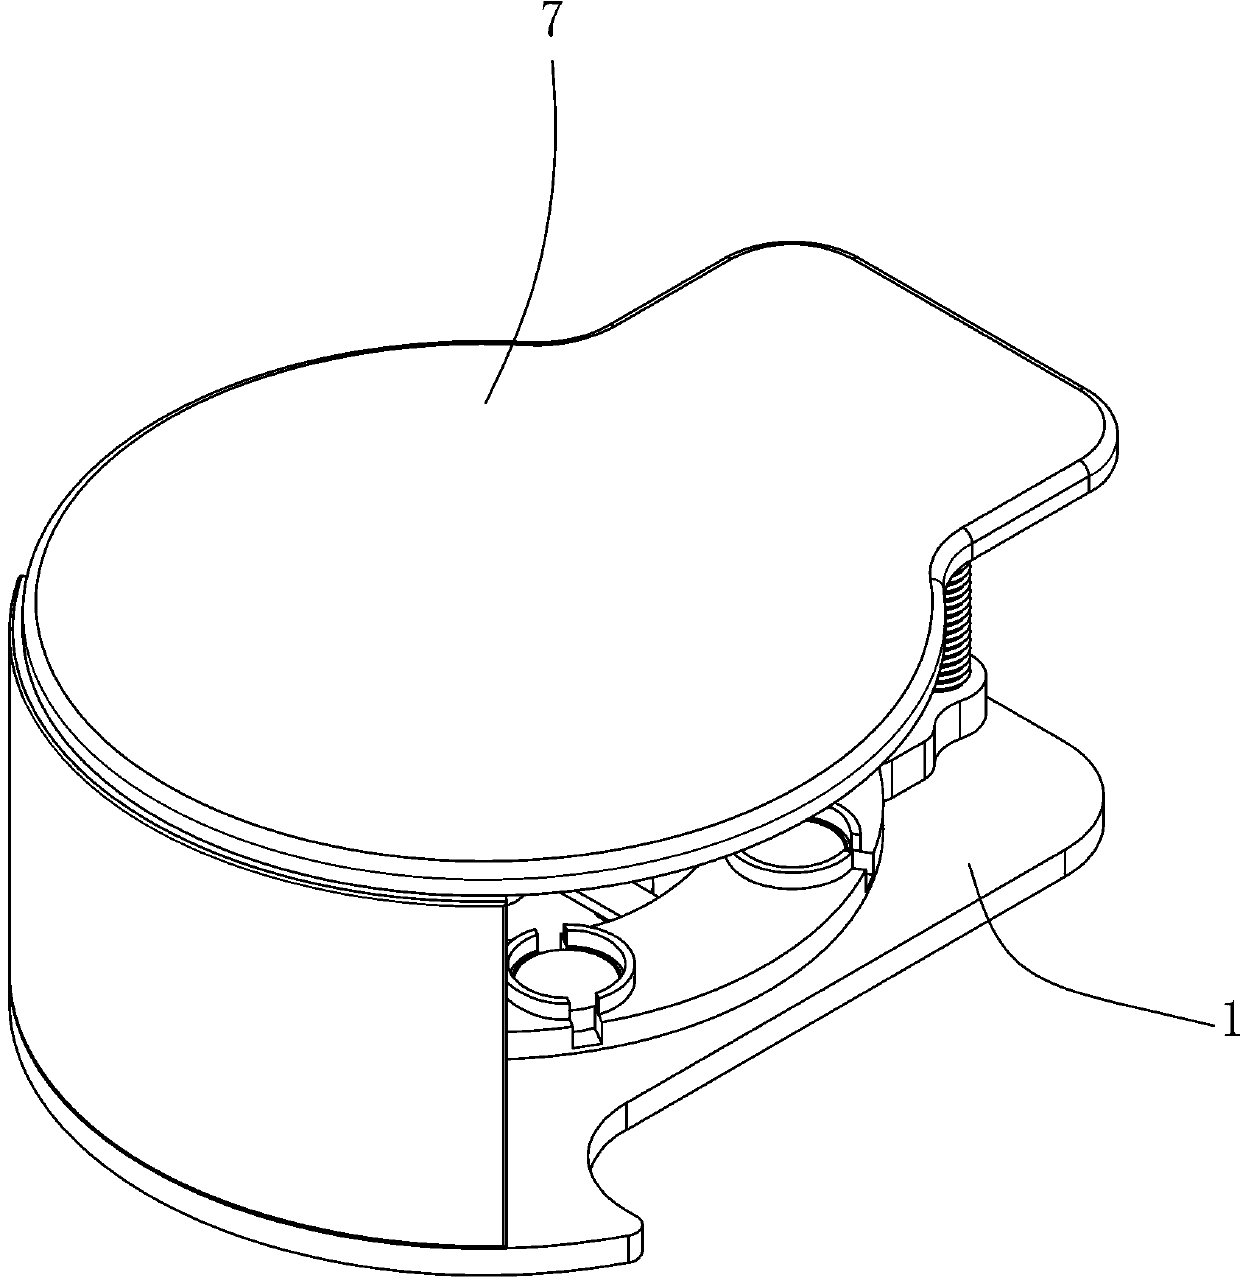 An ultrasonic suspension surround painting device